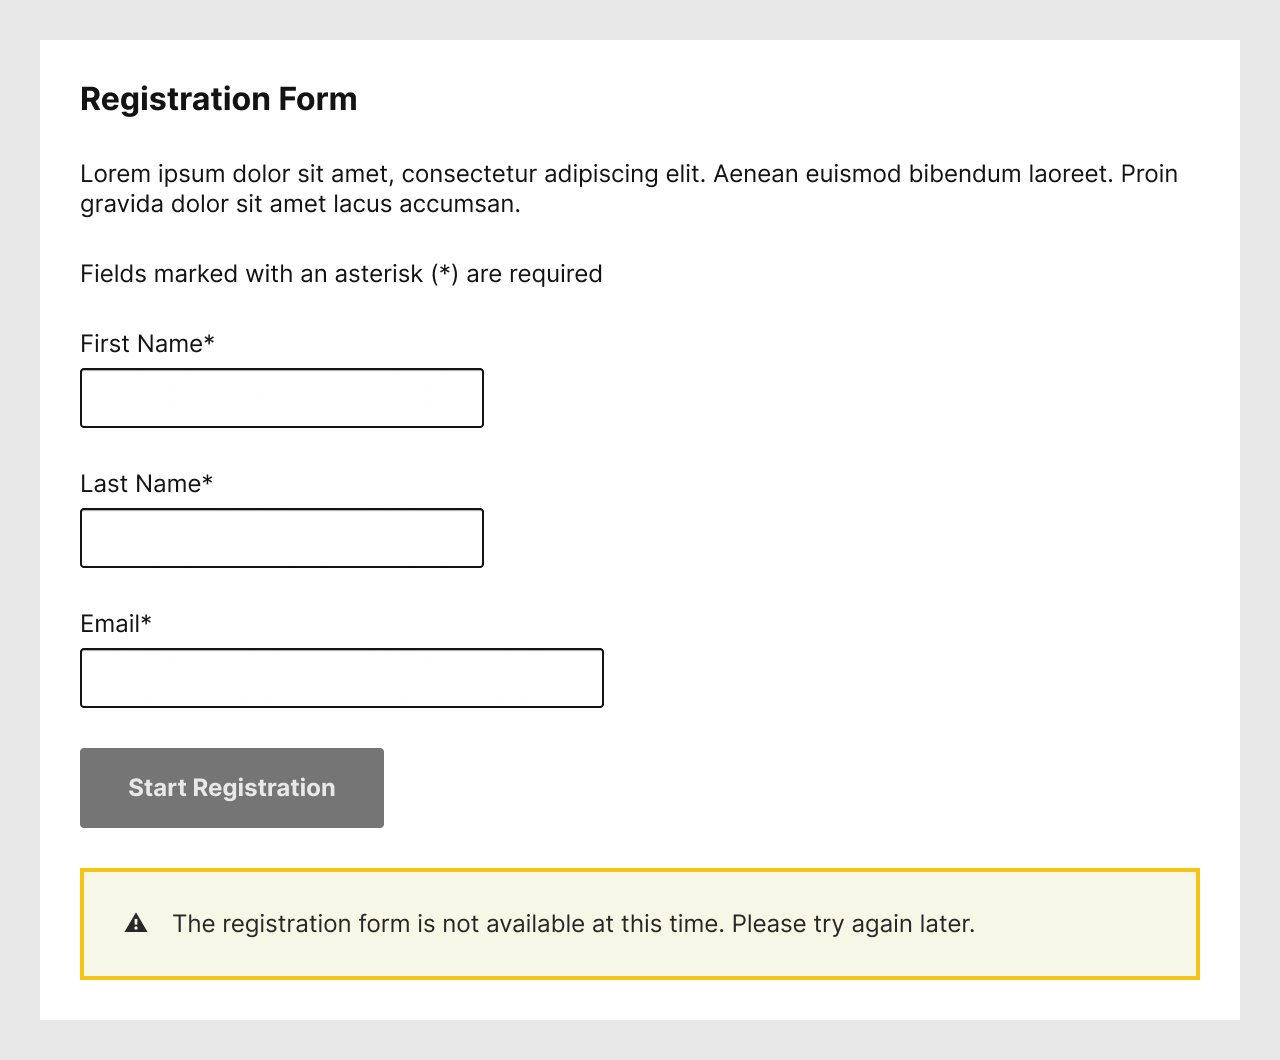 A registration form with the submit button disabled. A warning block at the bottom informs that registration is not available